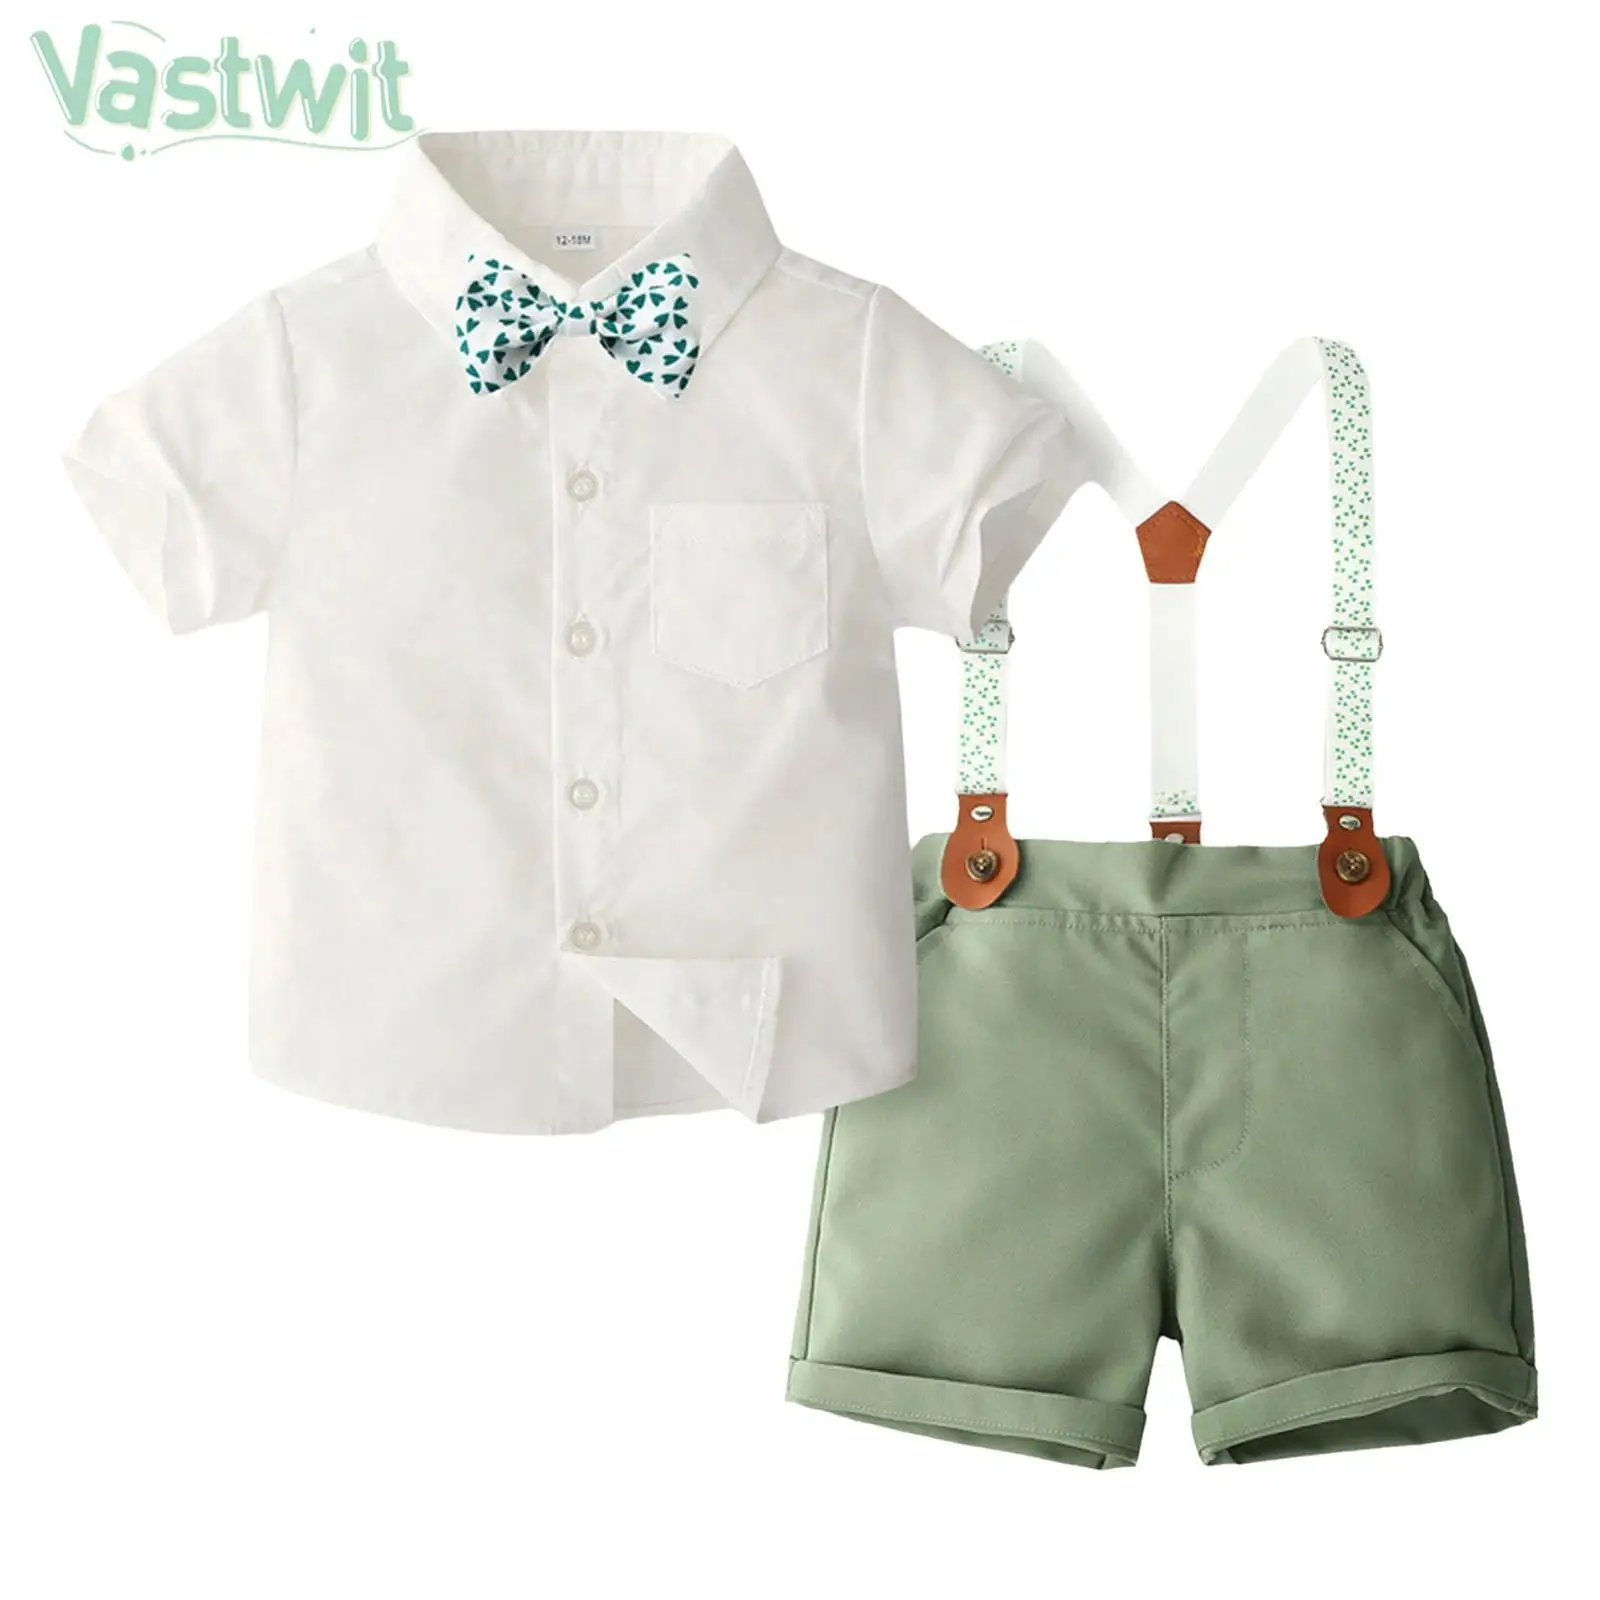 

Toddler Boys British Style Gentleman Suit Birthday Wedding Party Formal Set Short Sleeve Shirt with Bow Tie Suspender Shorts